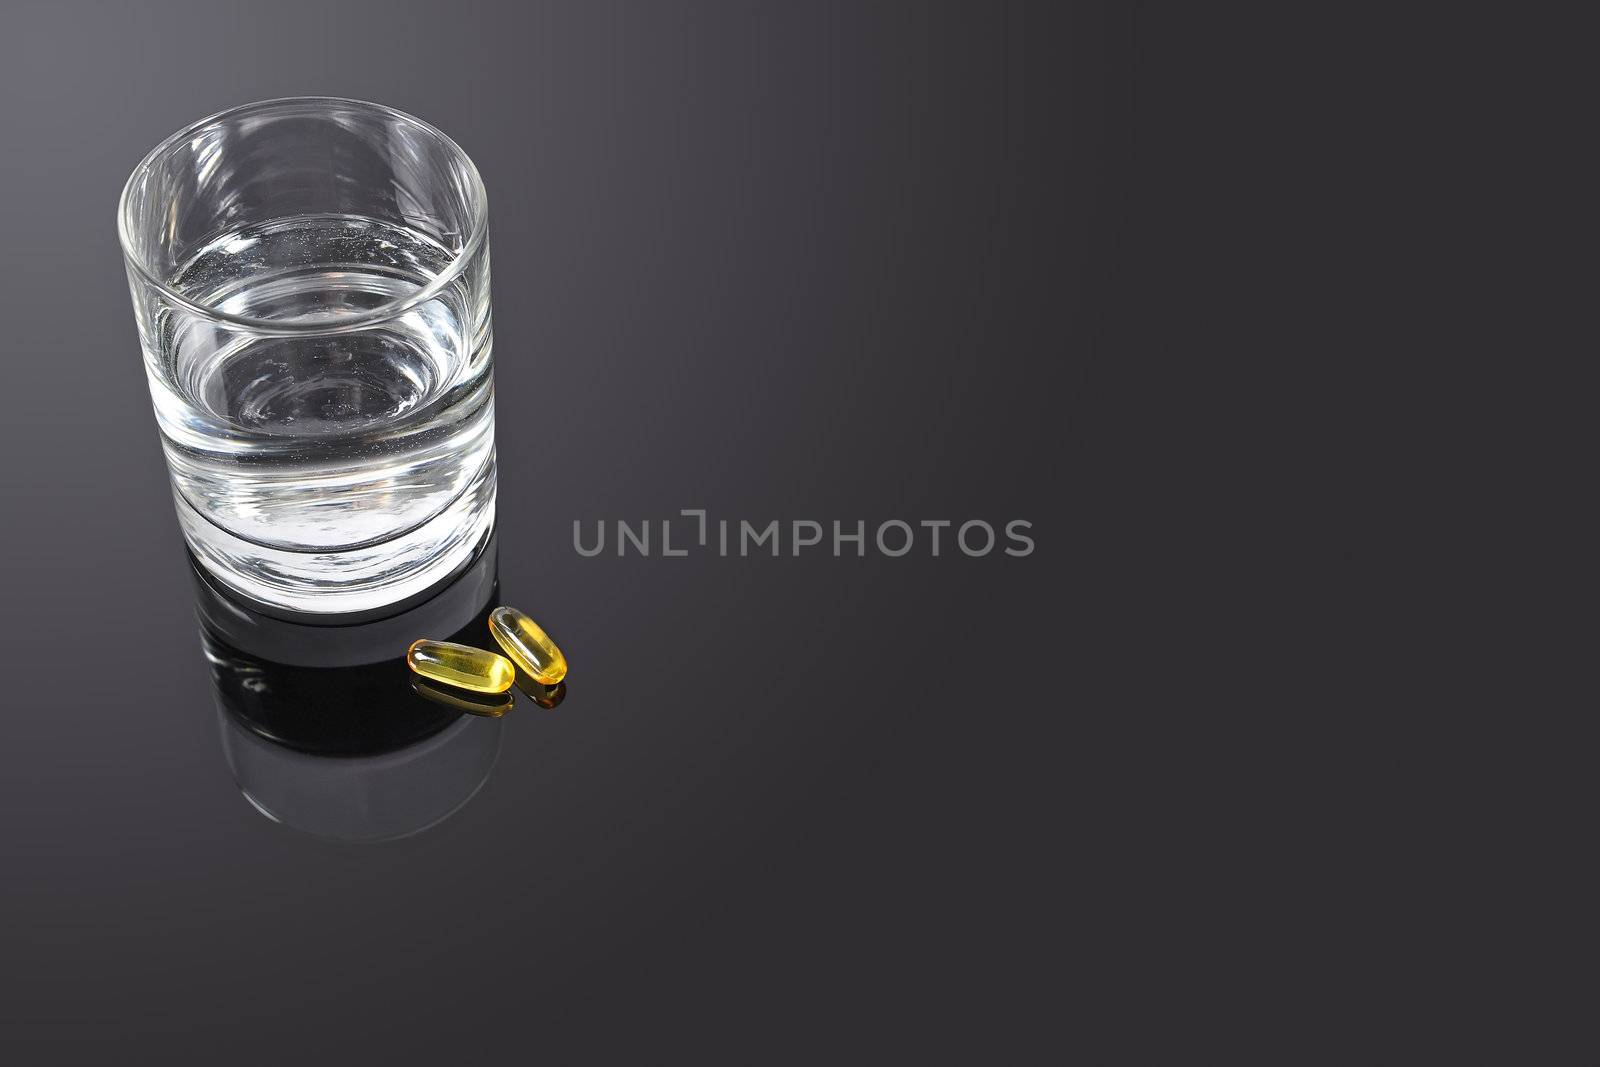 A couple of yellow vitamin pills on a black glass table with a glass of water at the side